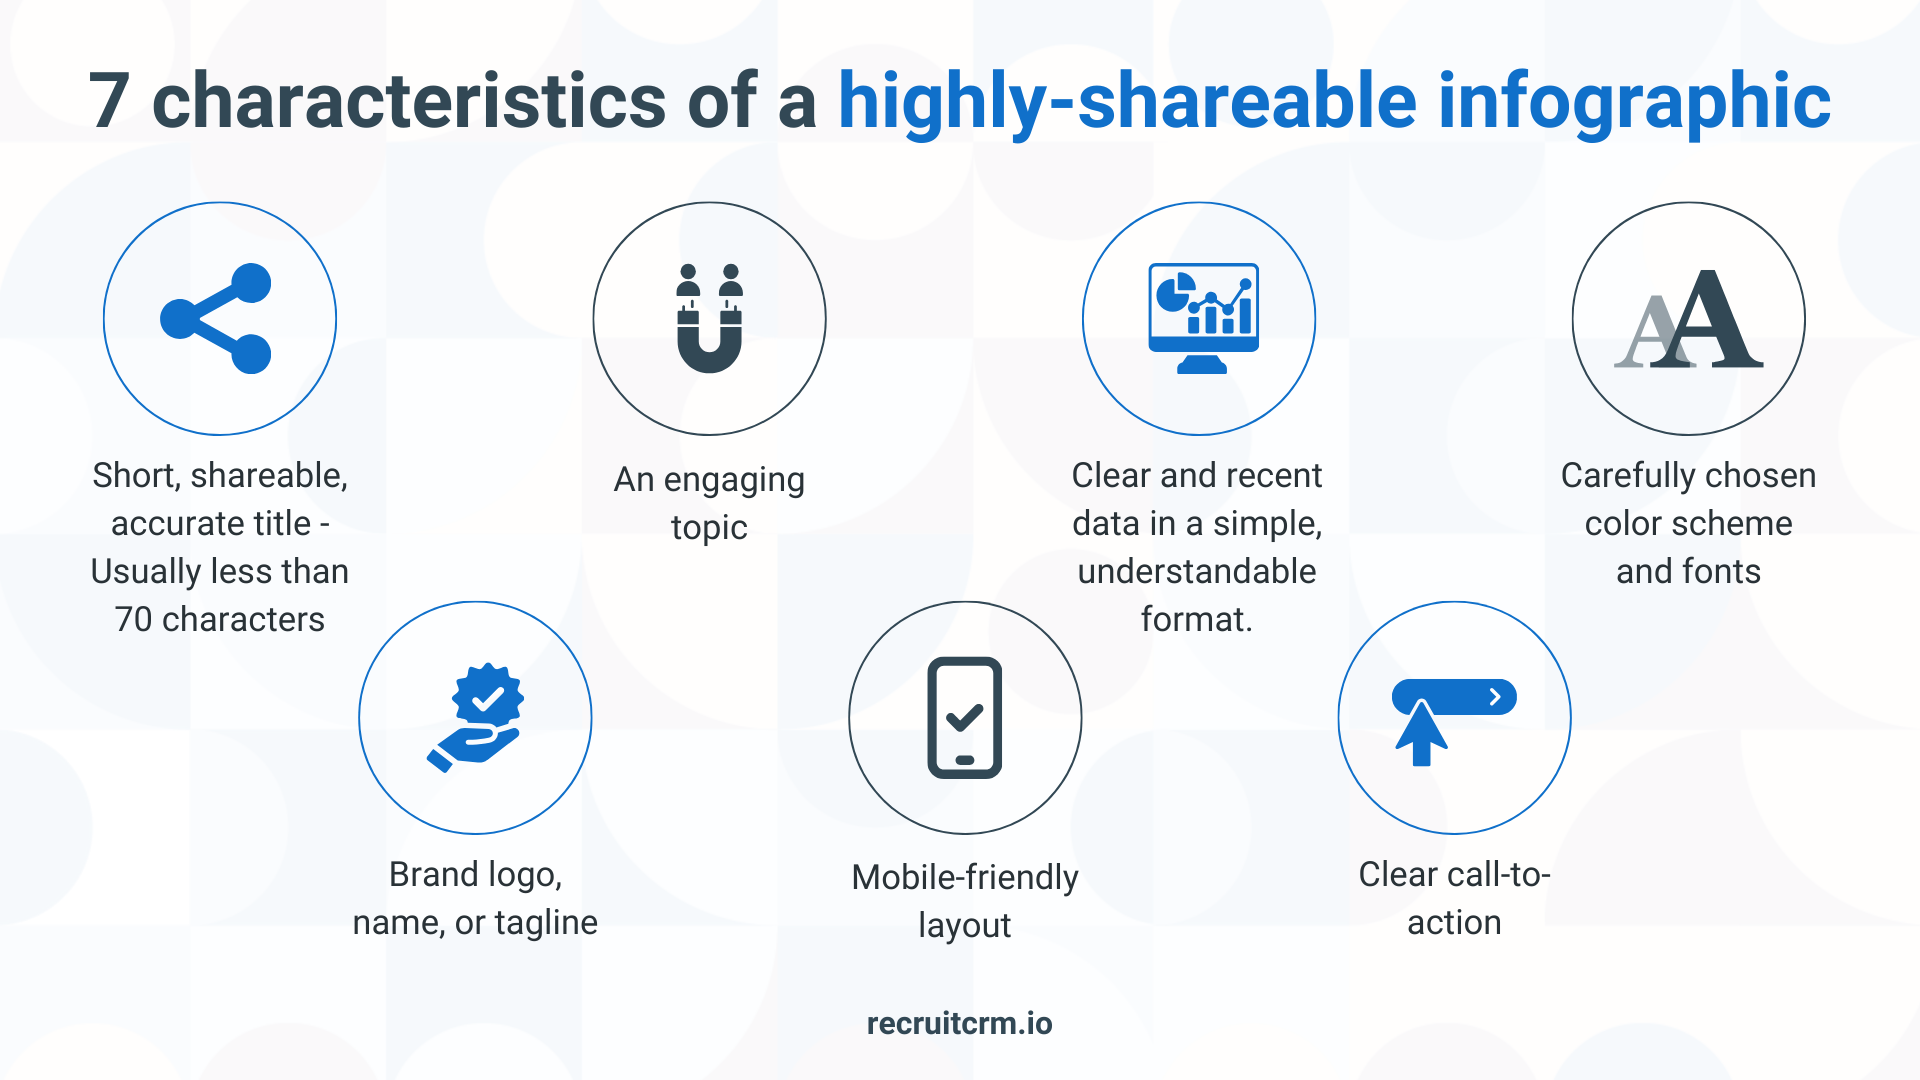 7 characteristics of a highly-shareable infographic